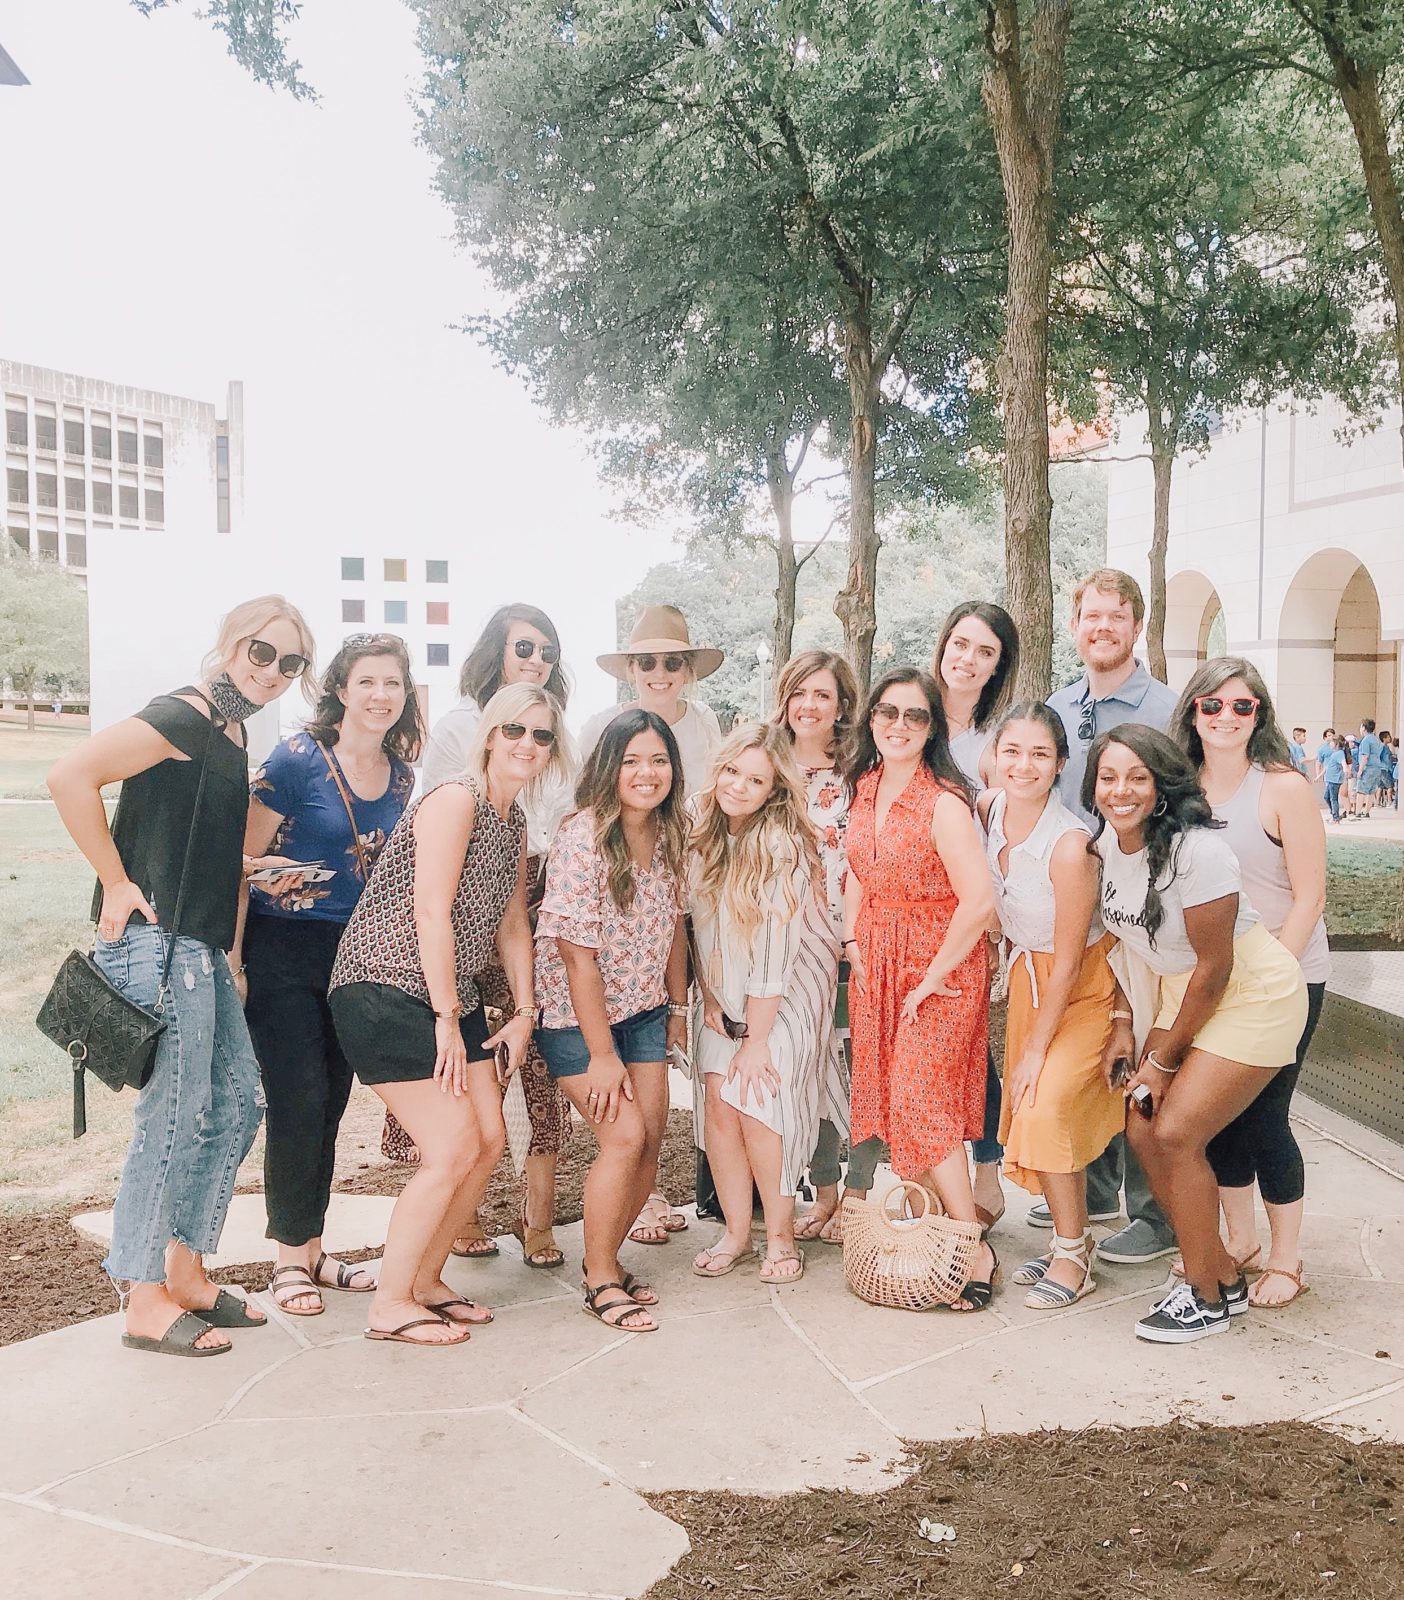 The Best of Austin with Hunter Fan Co! - Cotton Stem